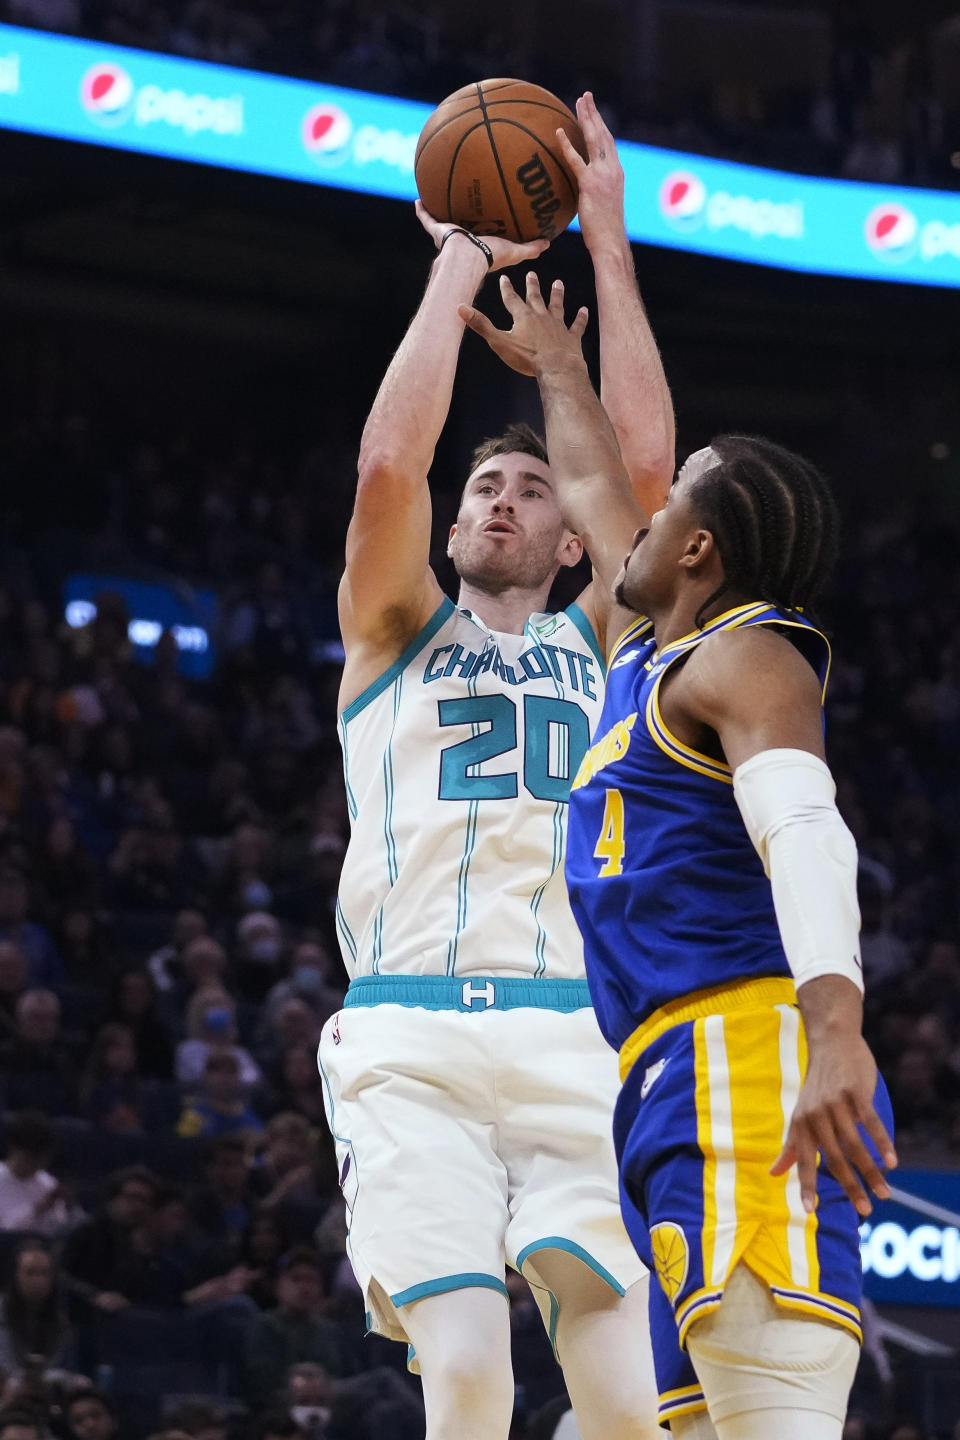 Charlotte Hornets forward Gordon Hayward (20) shoots over Golden State Warriors guard Moses Moody during the first half of an NBA basketball game in San Francisco, Tuesday, Dec. 27, 2022. (AP Photo/Godofredo A. Vásquez)